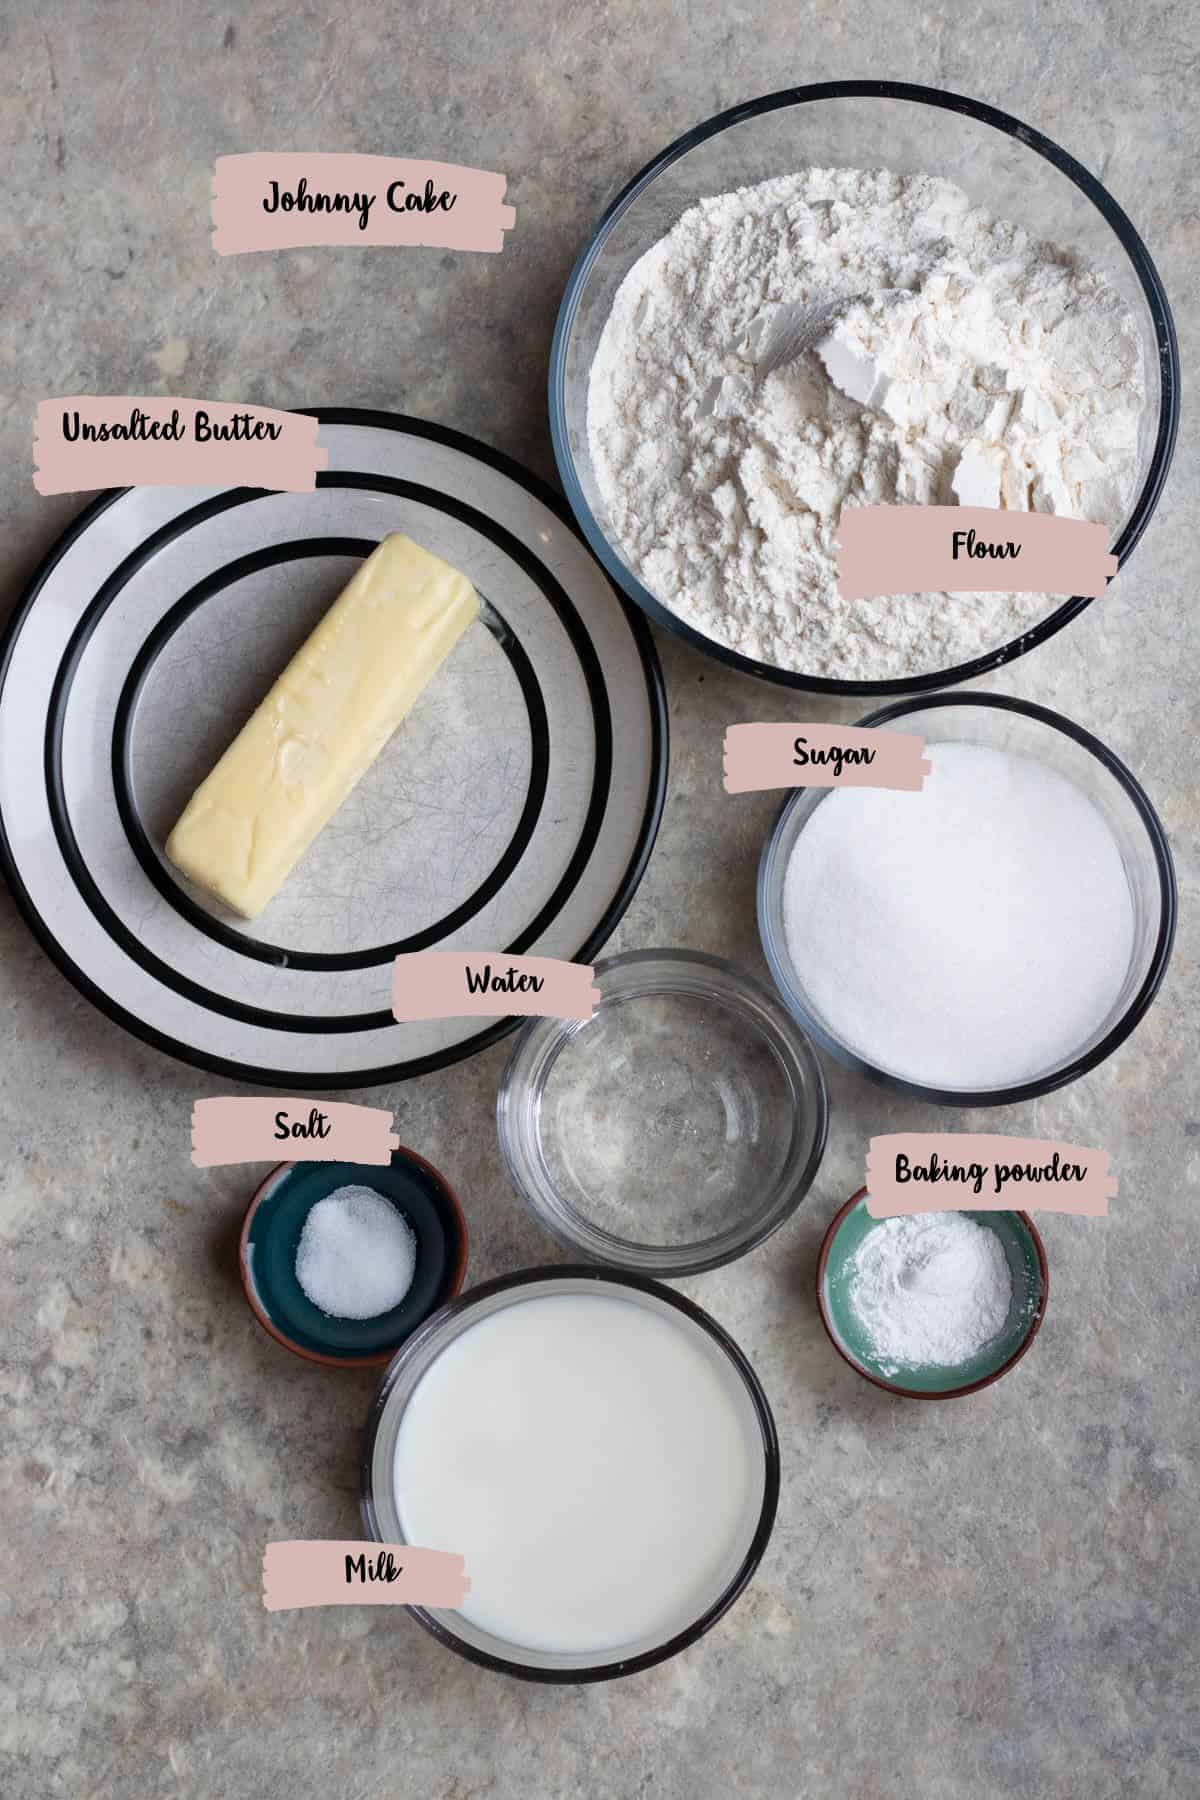 Ingredients shown are used to prepare Johnny Cake. 